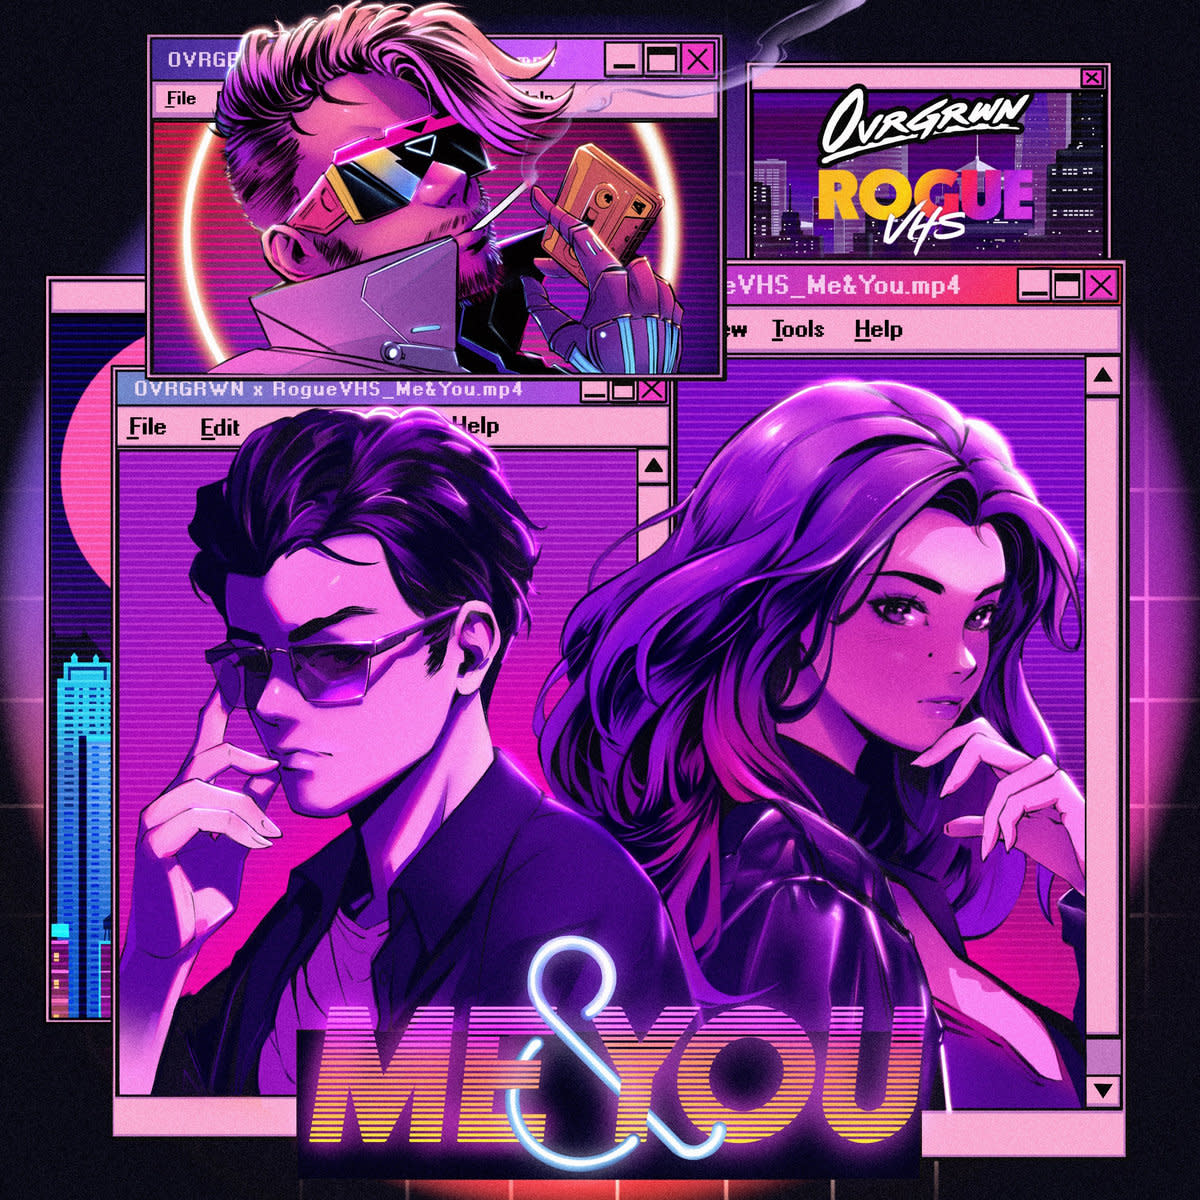 Synth Single Review: “Me & You” by Rogue VHS